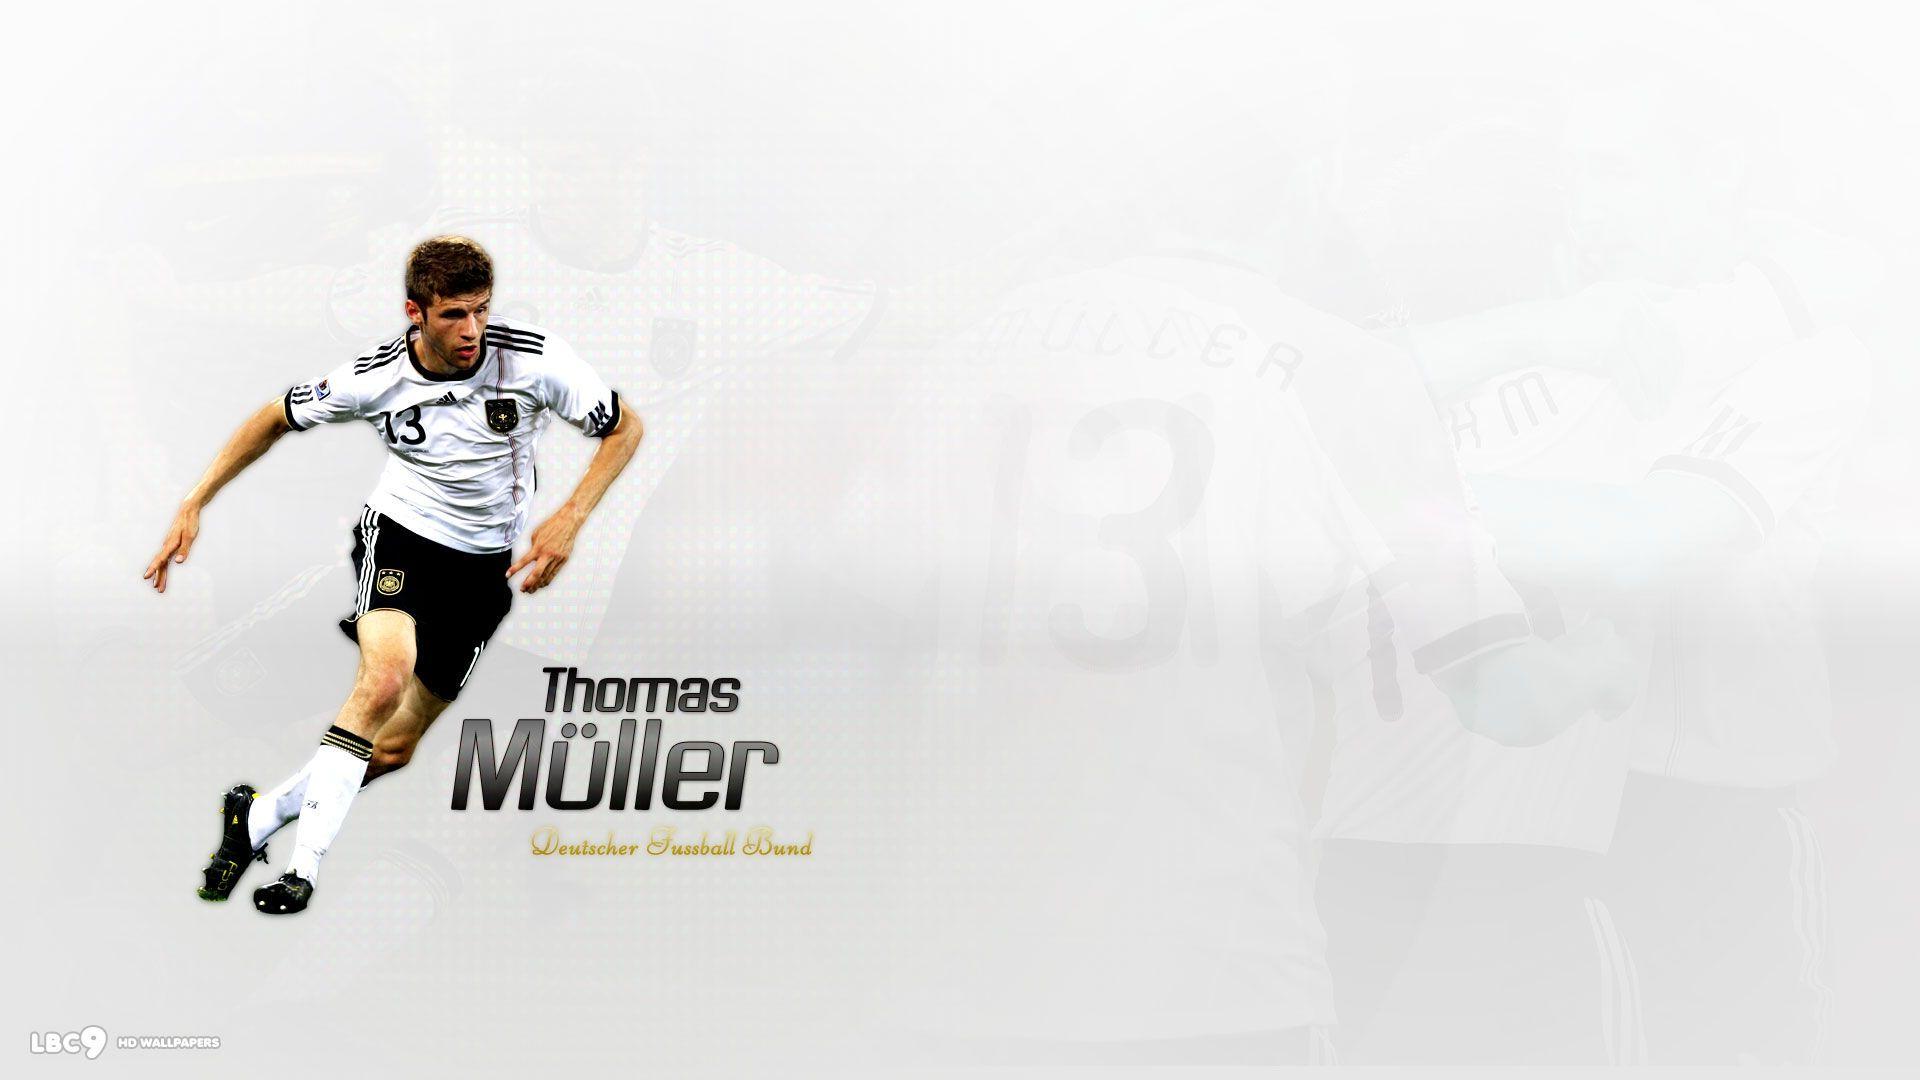 Thomas Muller Wallpaper 1 5. Players HD Background